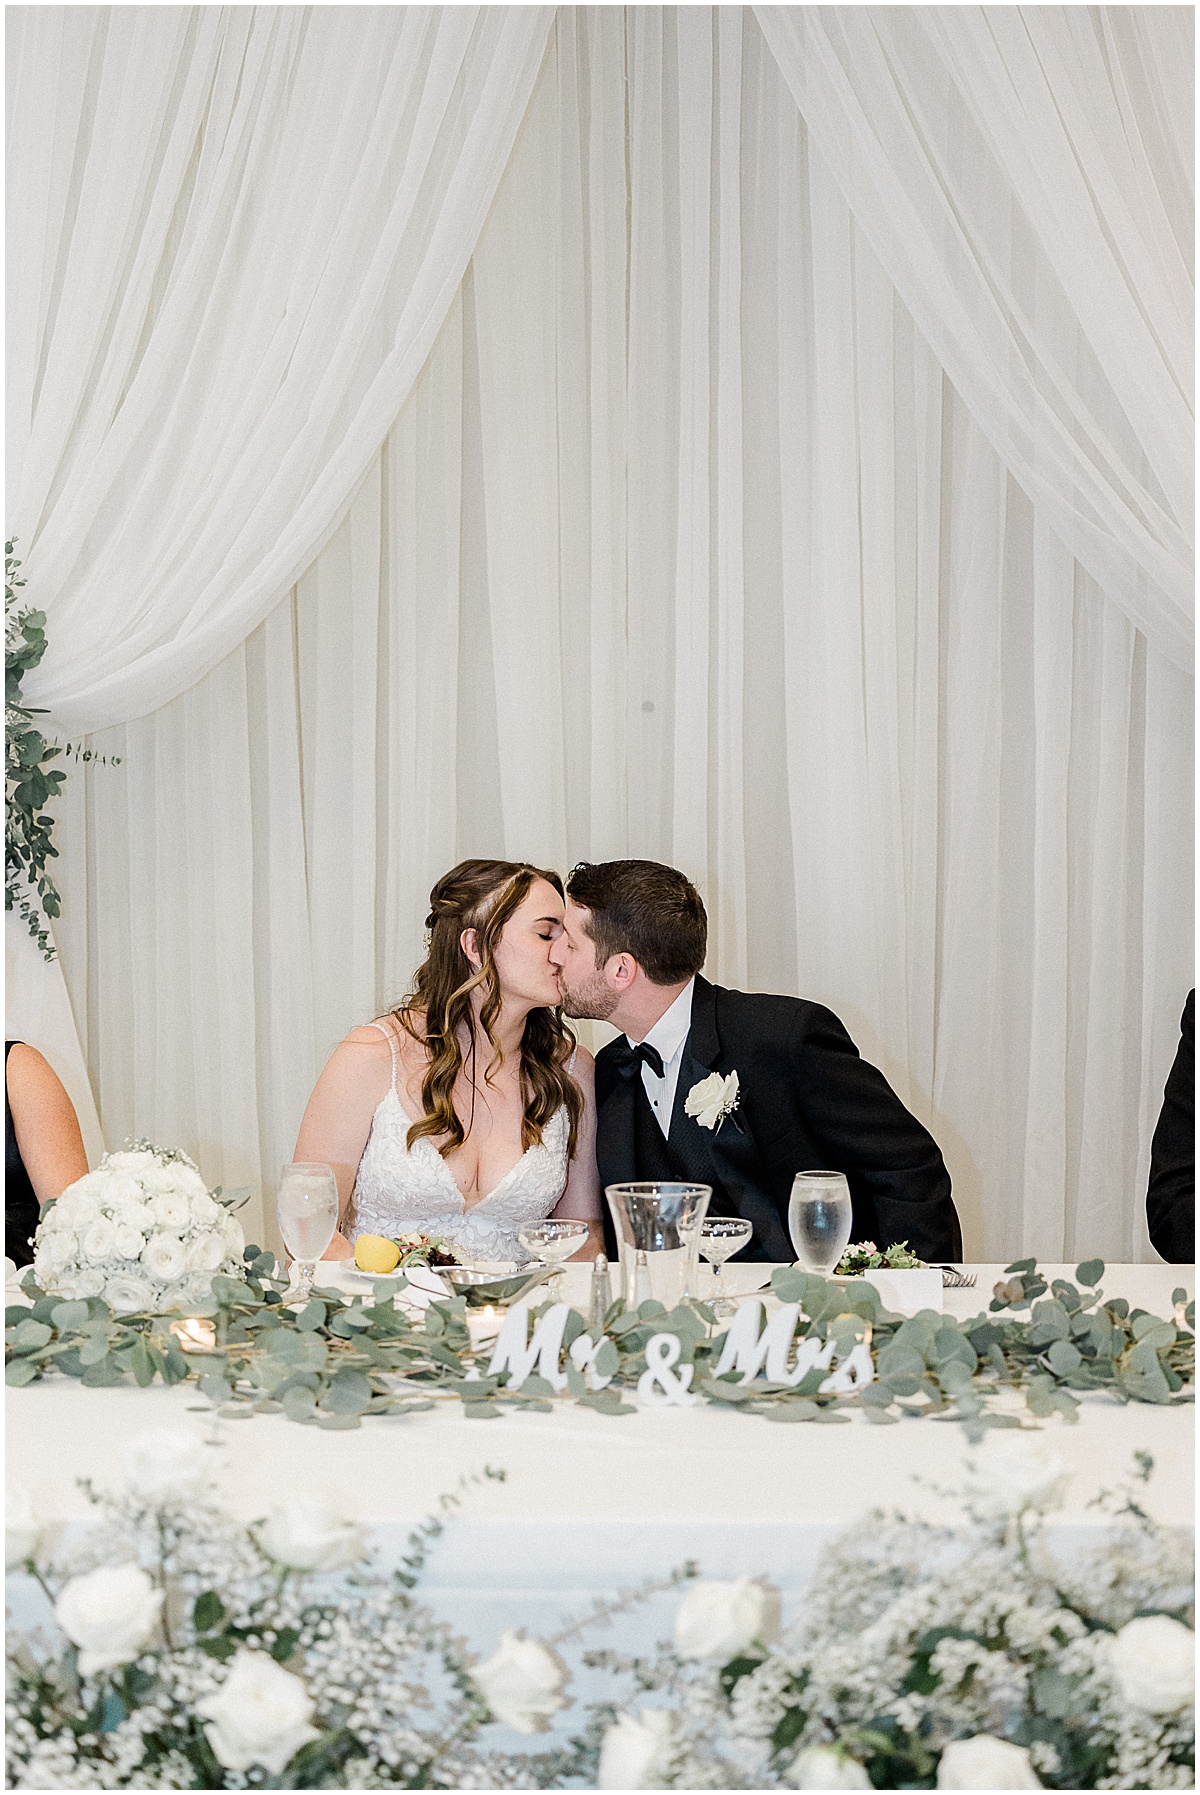 Wellington wedding in Fishers, IN captured by Kaitlin Mendoza Photography